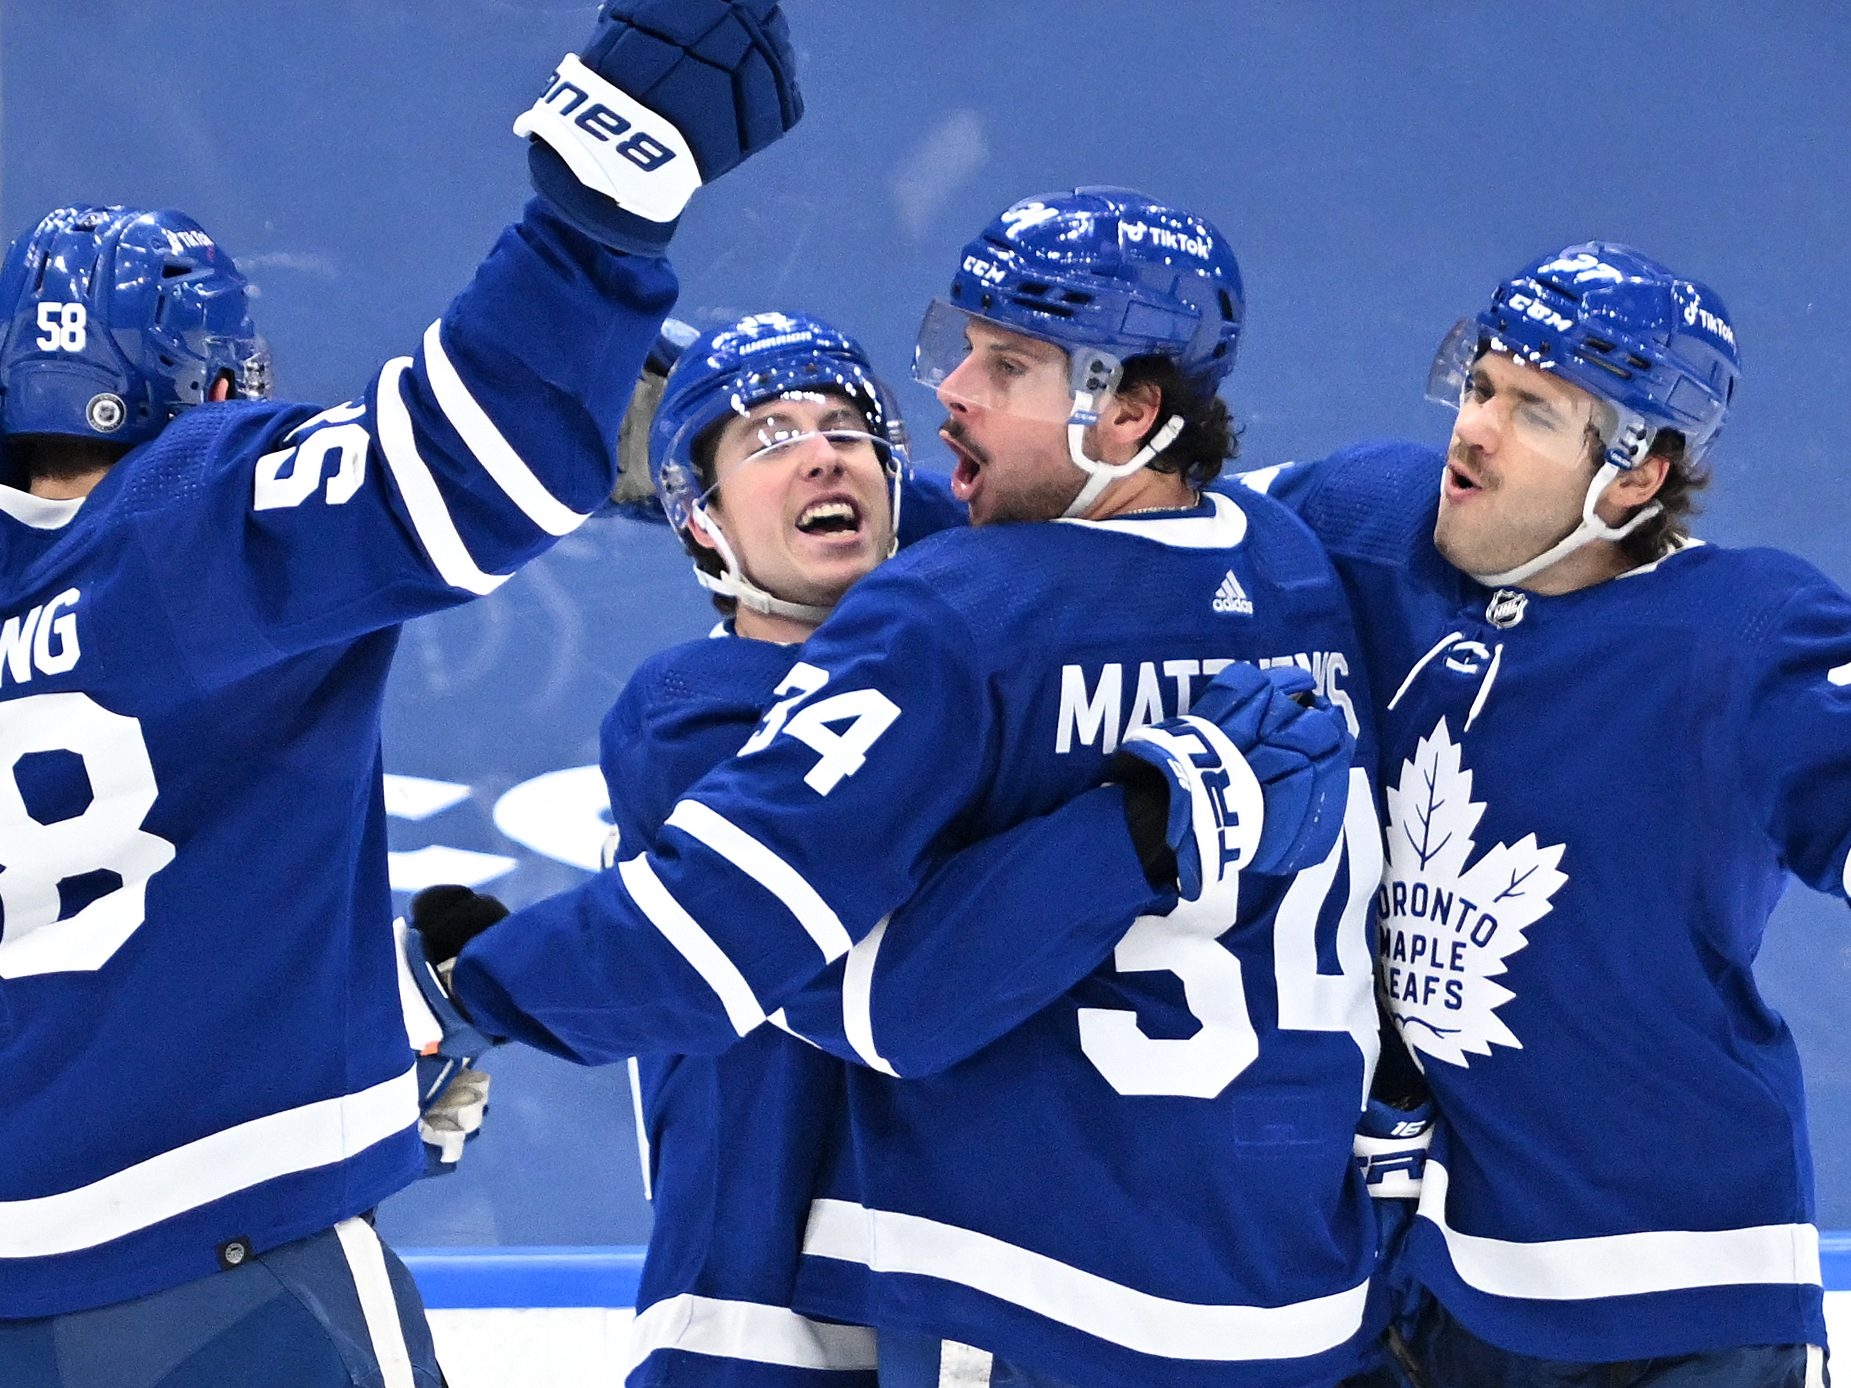 Marner records 4 points as Leafs blow out Devils